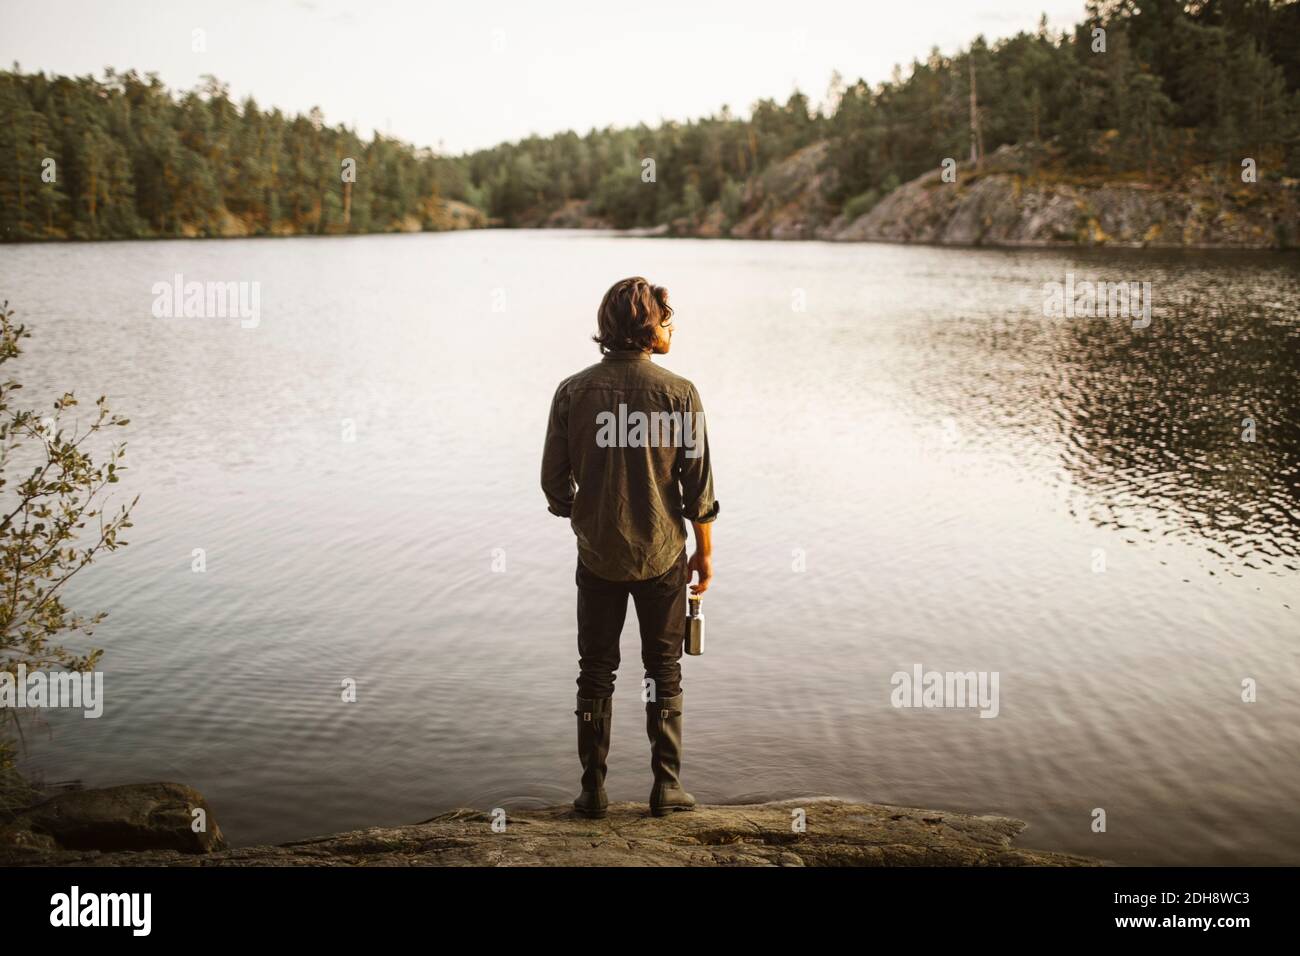 Rear view of man with bottle standing by lake in forest during vacation Stock Photo